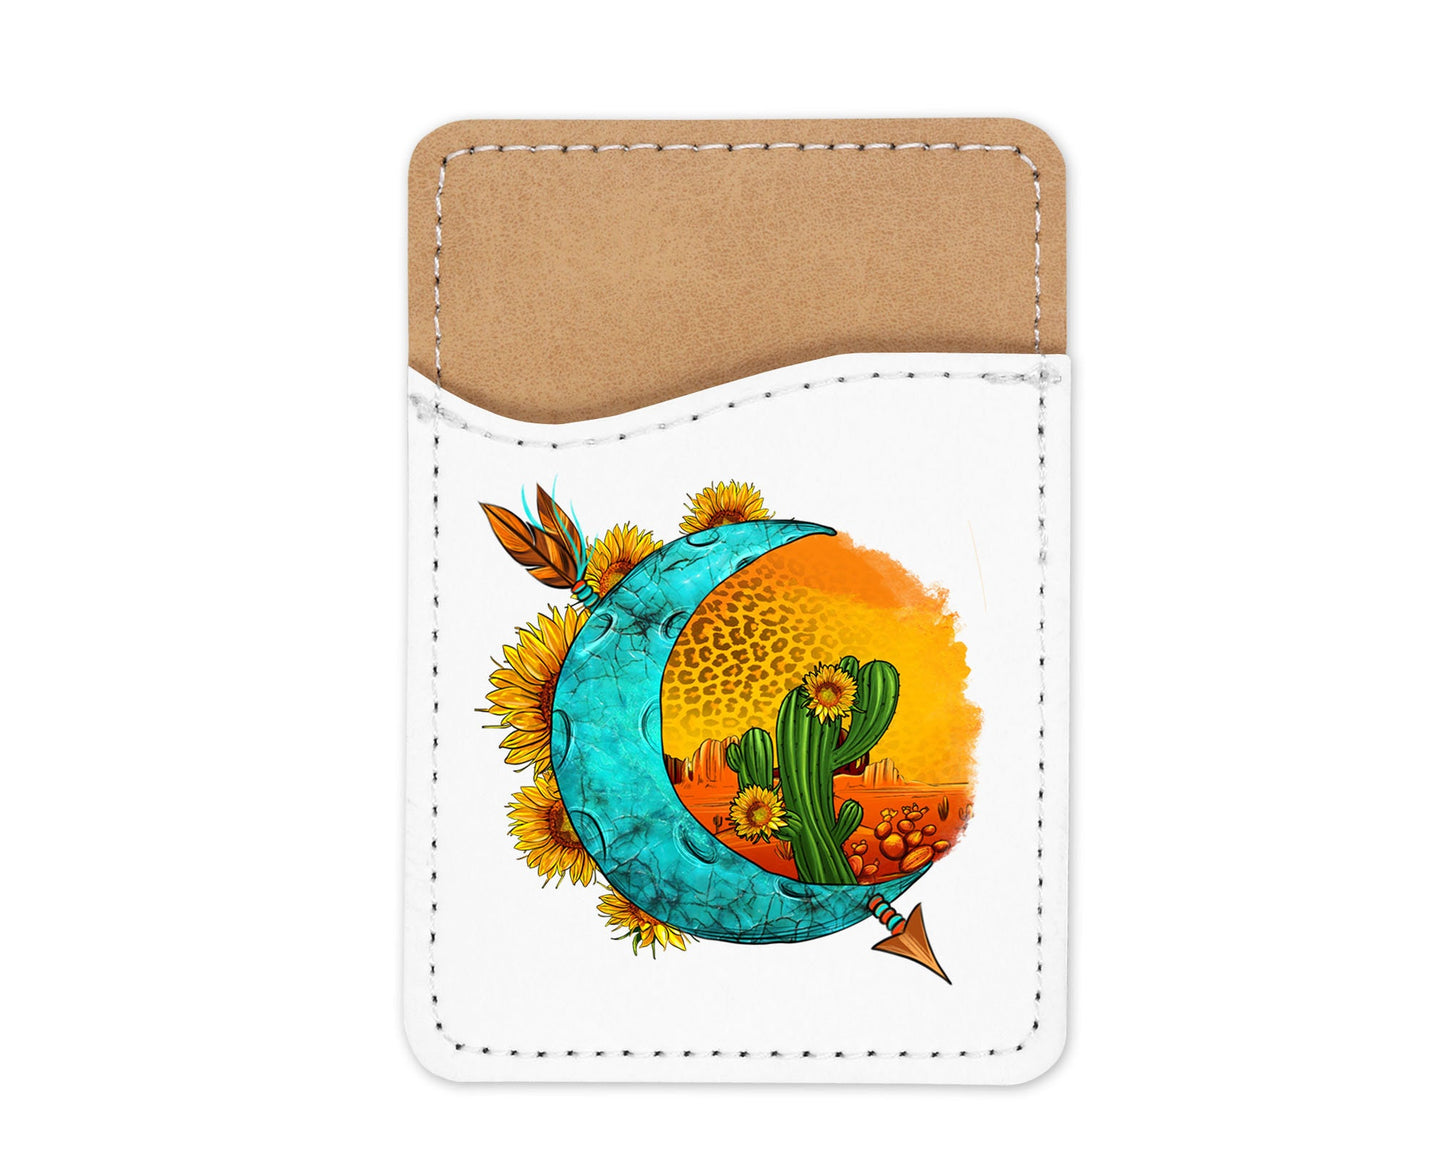 Turquoise Moon Phone Wallet Credit Card Holder